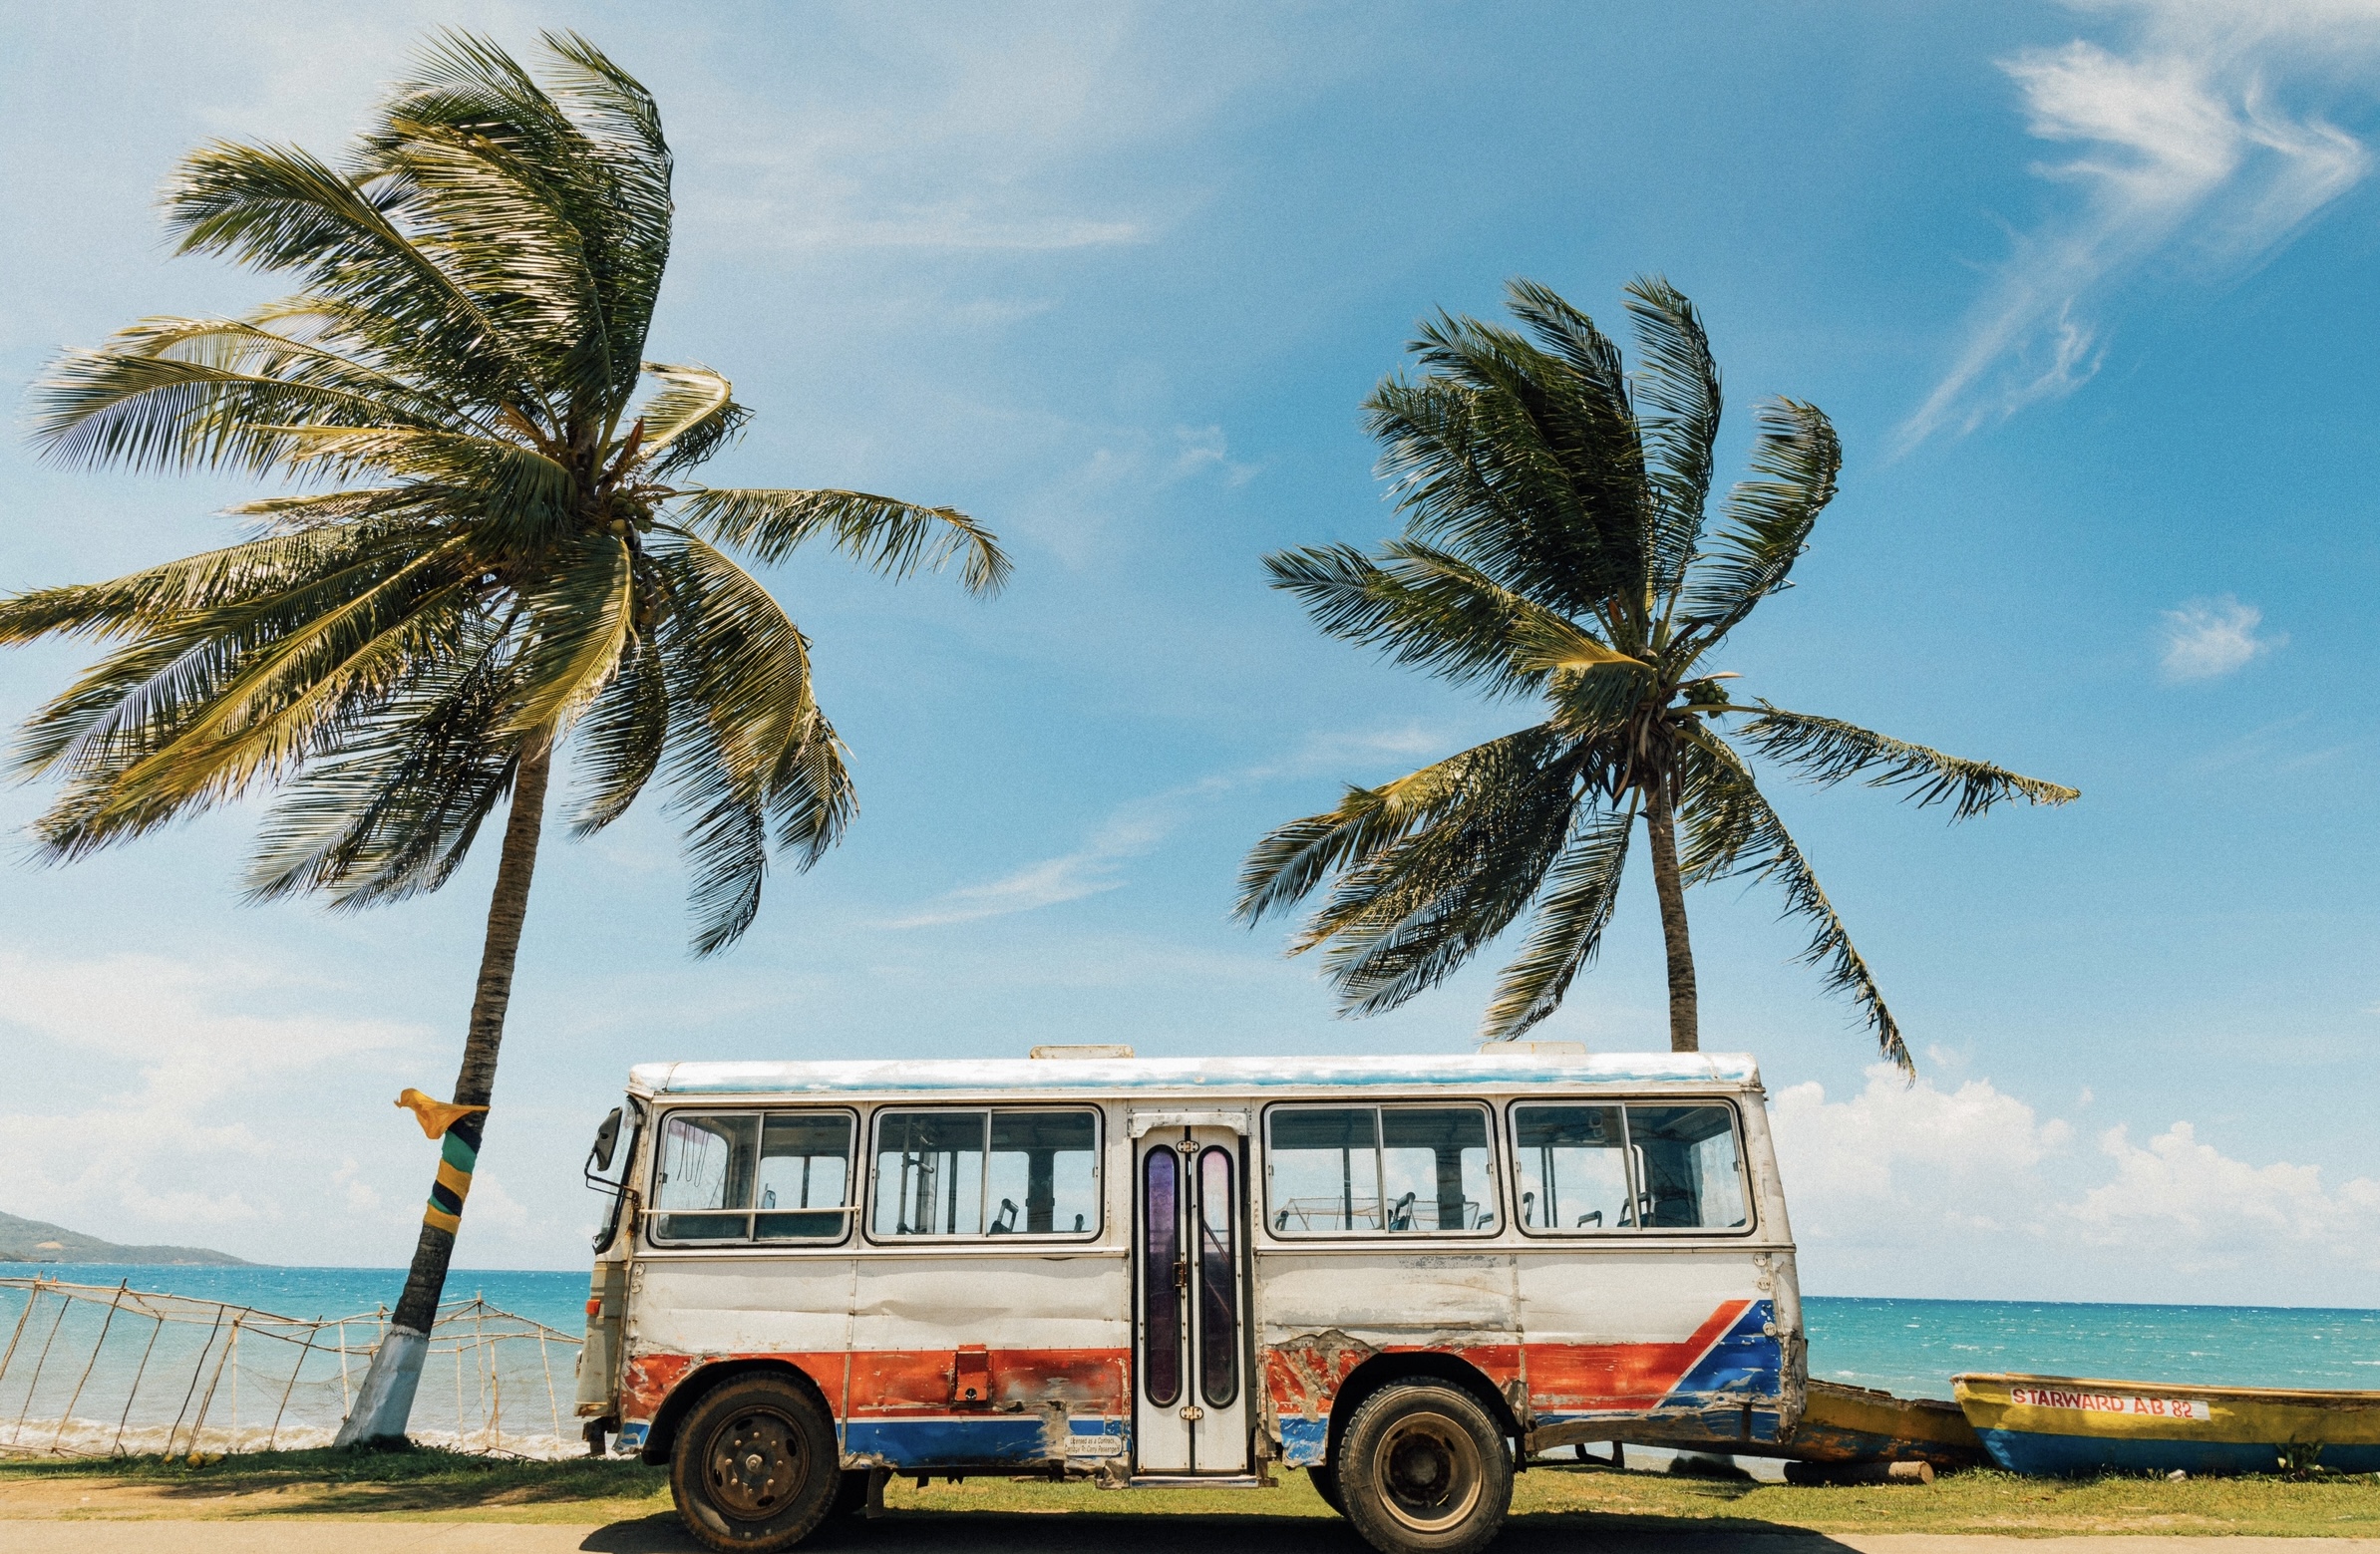 Jamaica is a hot destination that can make the best winter vacation location, during January. 
Pictured: a Jamaican beach with large palm trees, clear waters and a retro bus 